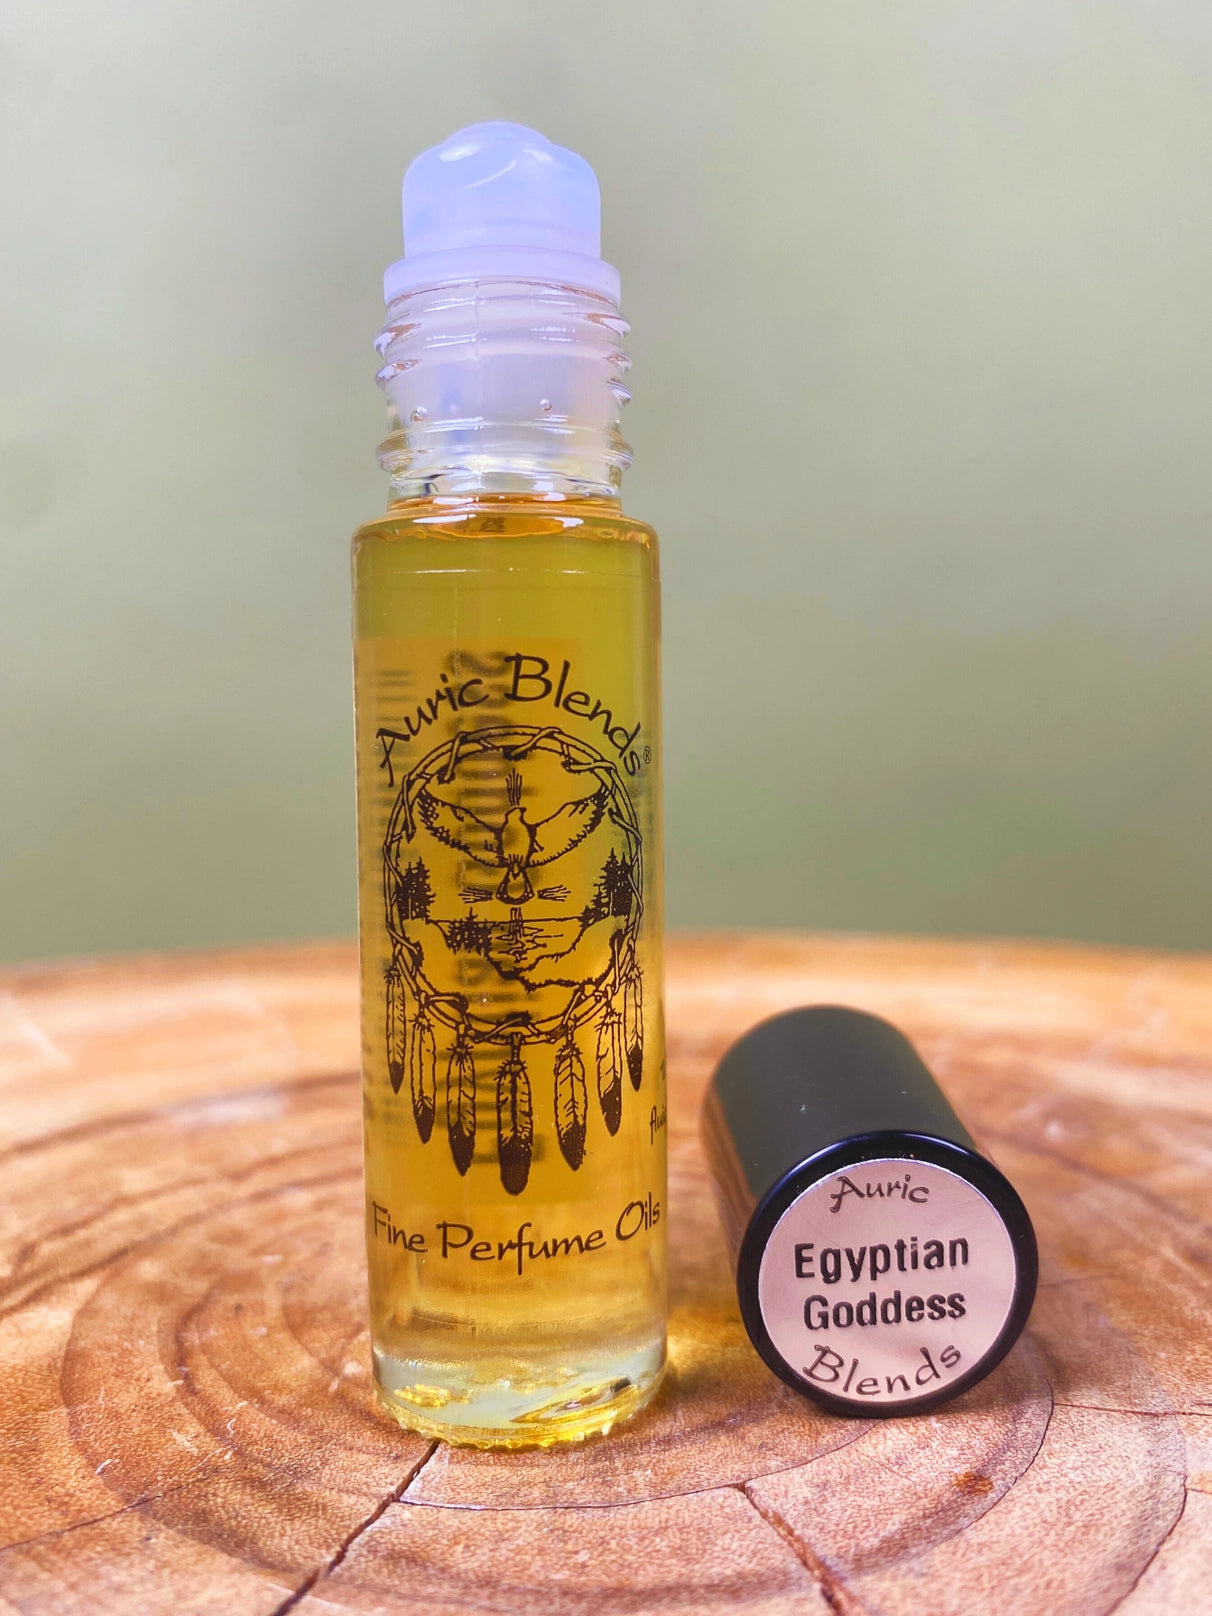 Egyptian Goddess Roll-On Perfume Oil by Auric Blends - Moon Room Shop and Wellness